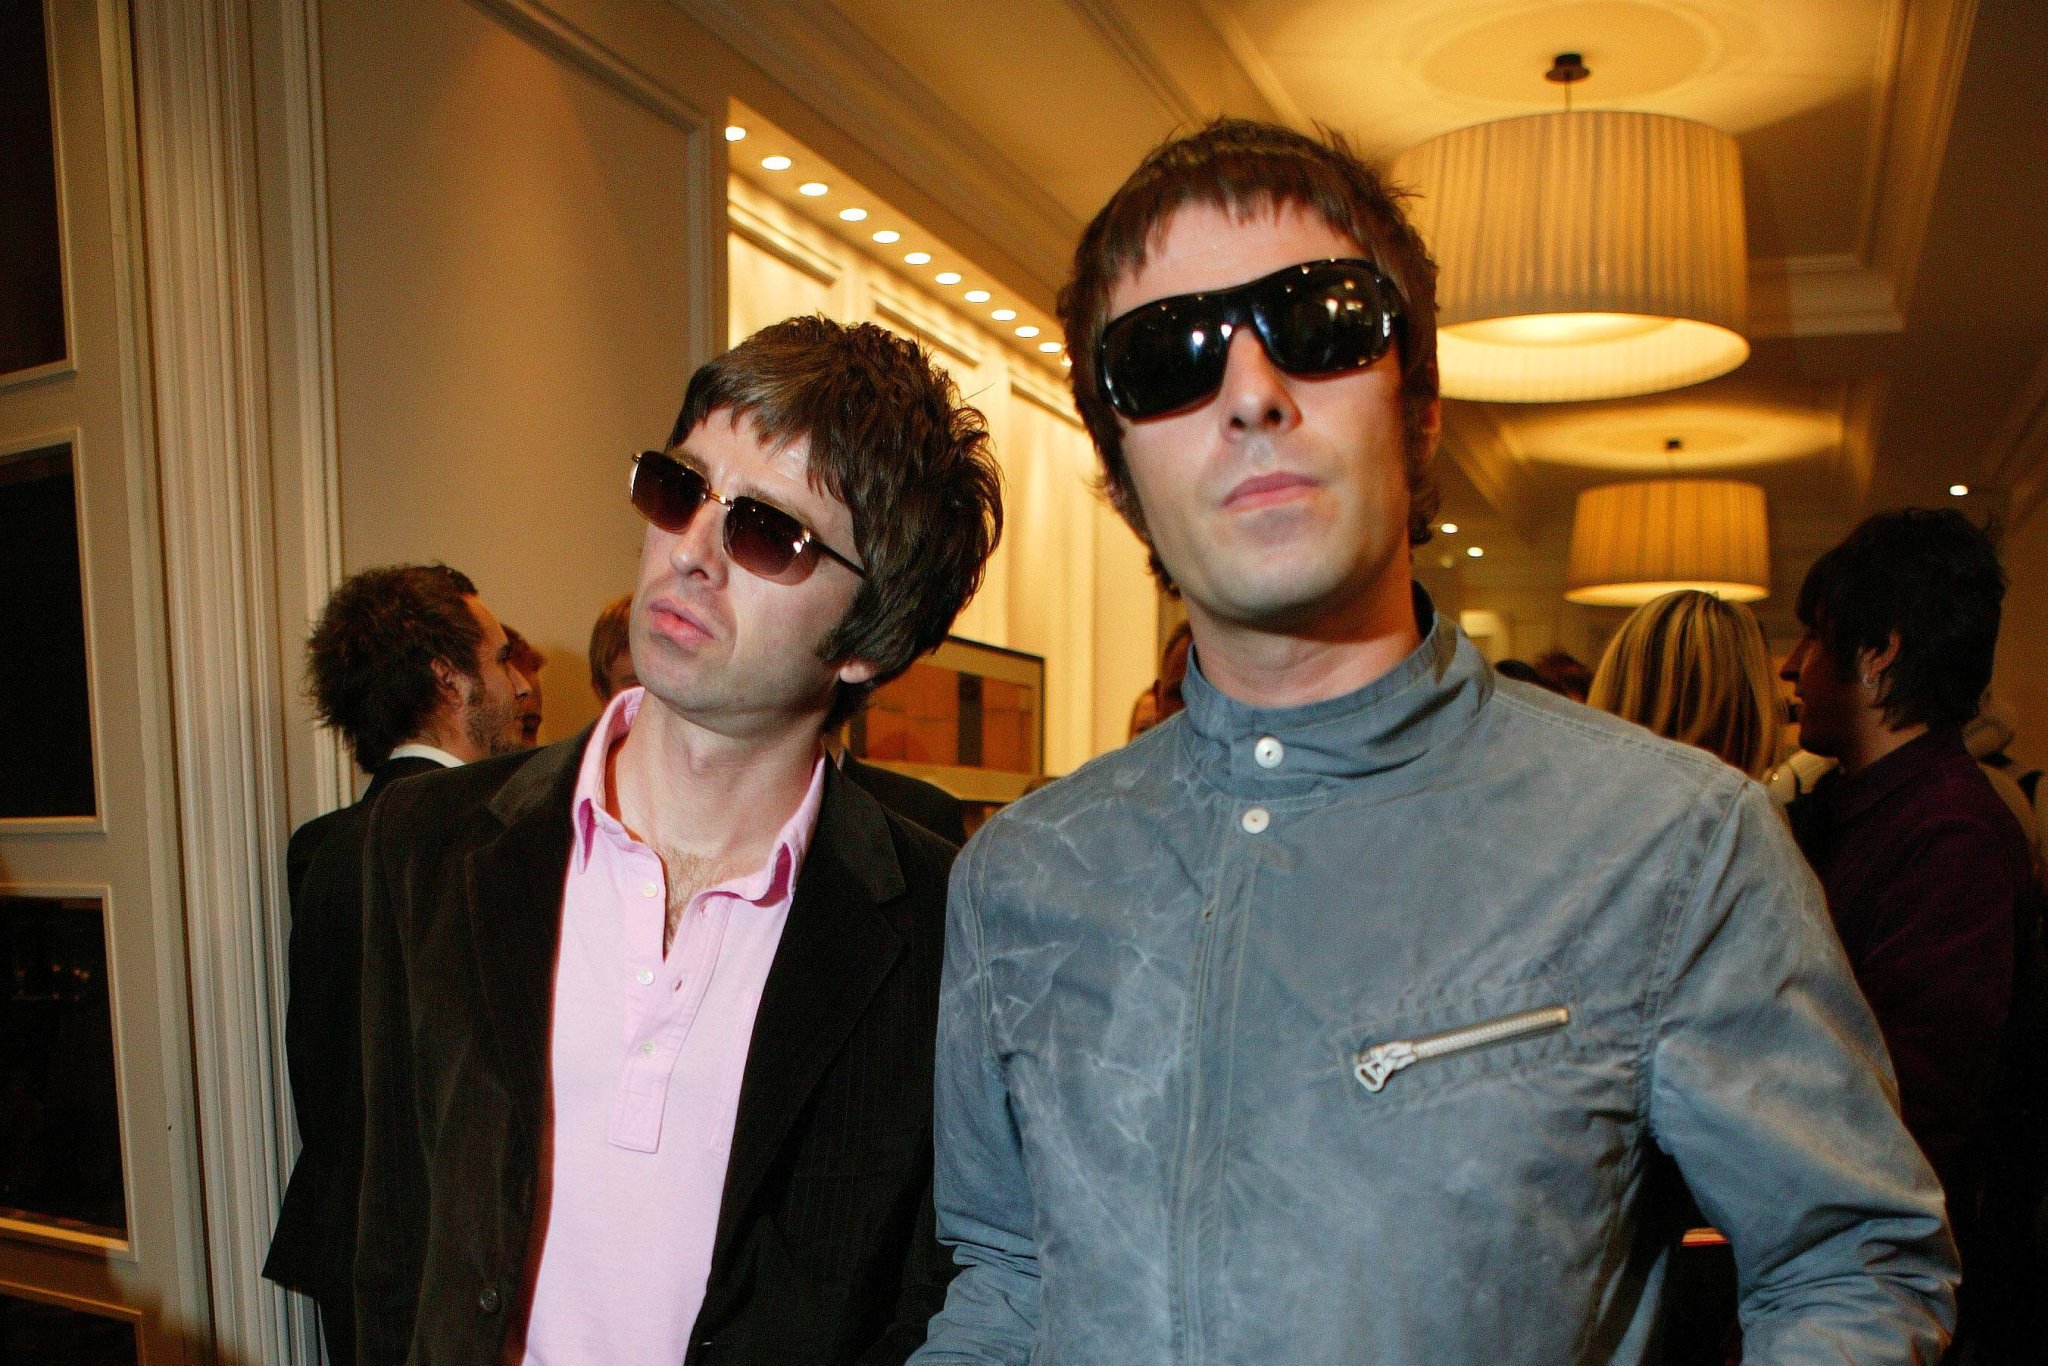 Our 2005 Feature on Oasis' Noel and Liam Gallagher